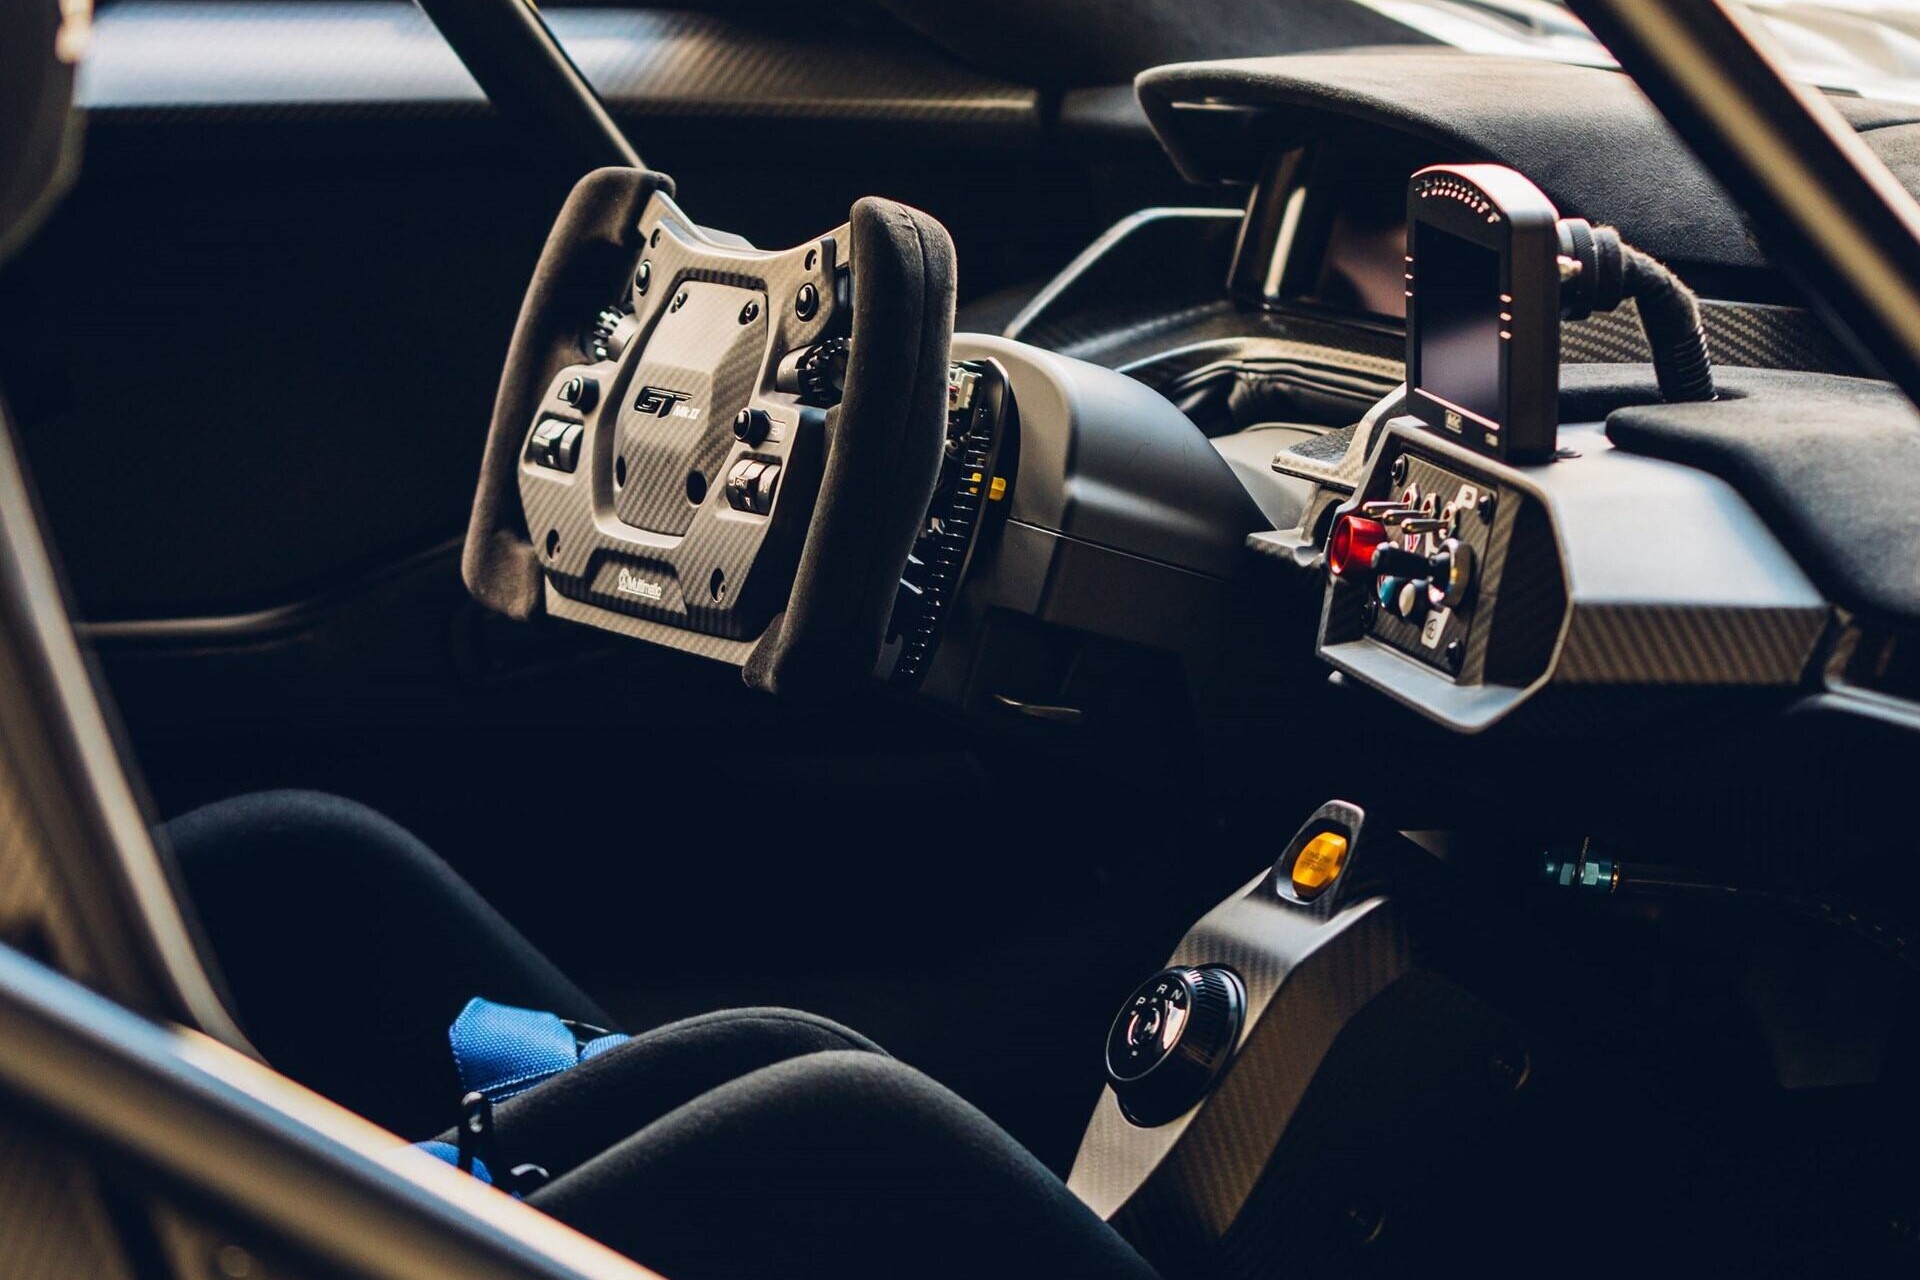 Interior of a blue 2020 Ford GT MK II track-only supercar